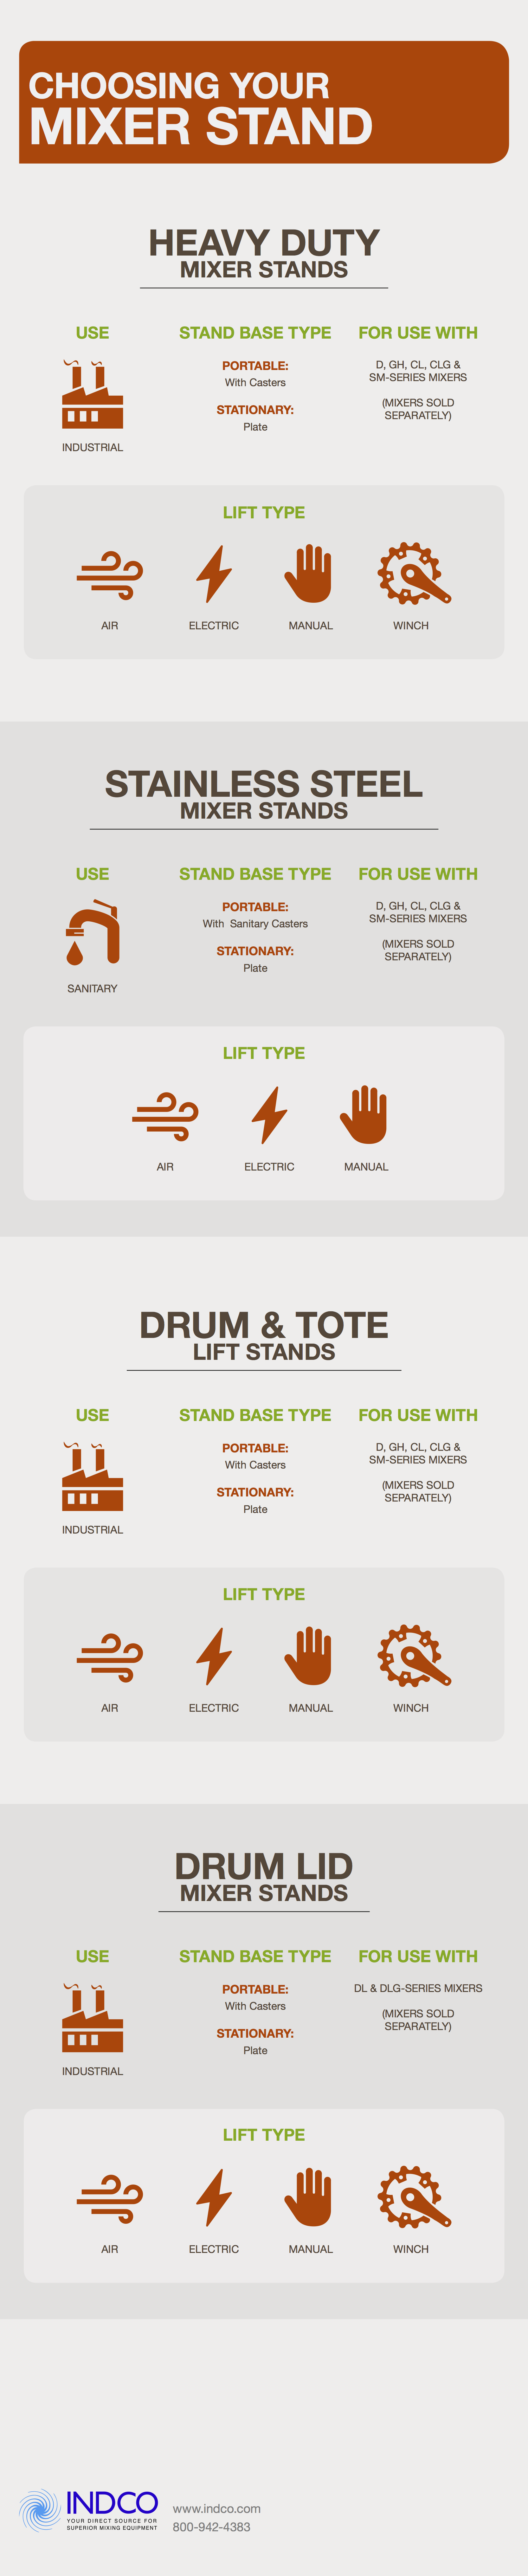 infographic for choosing a mixer stand